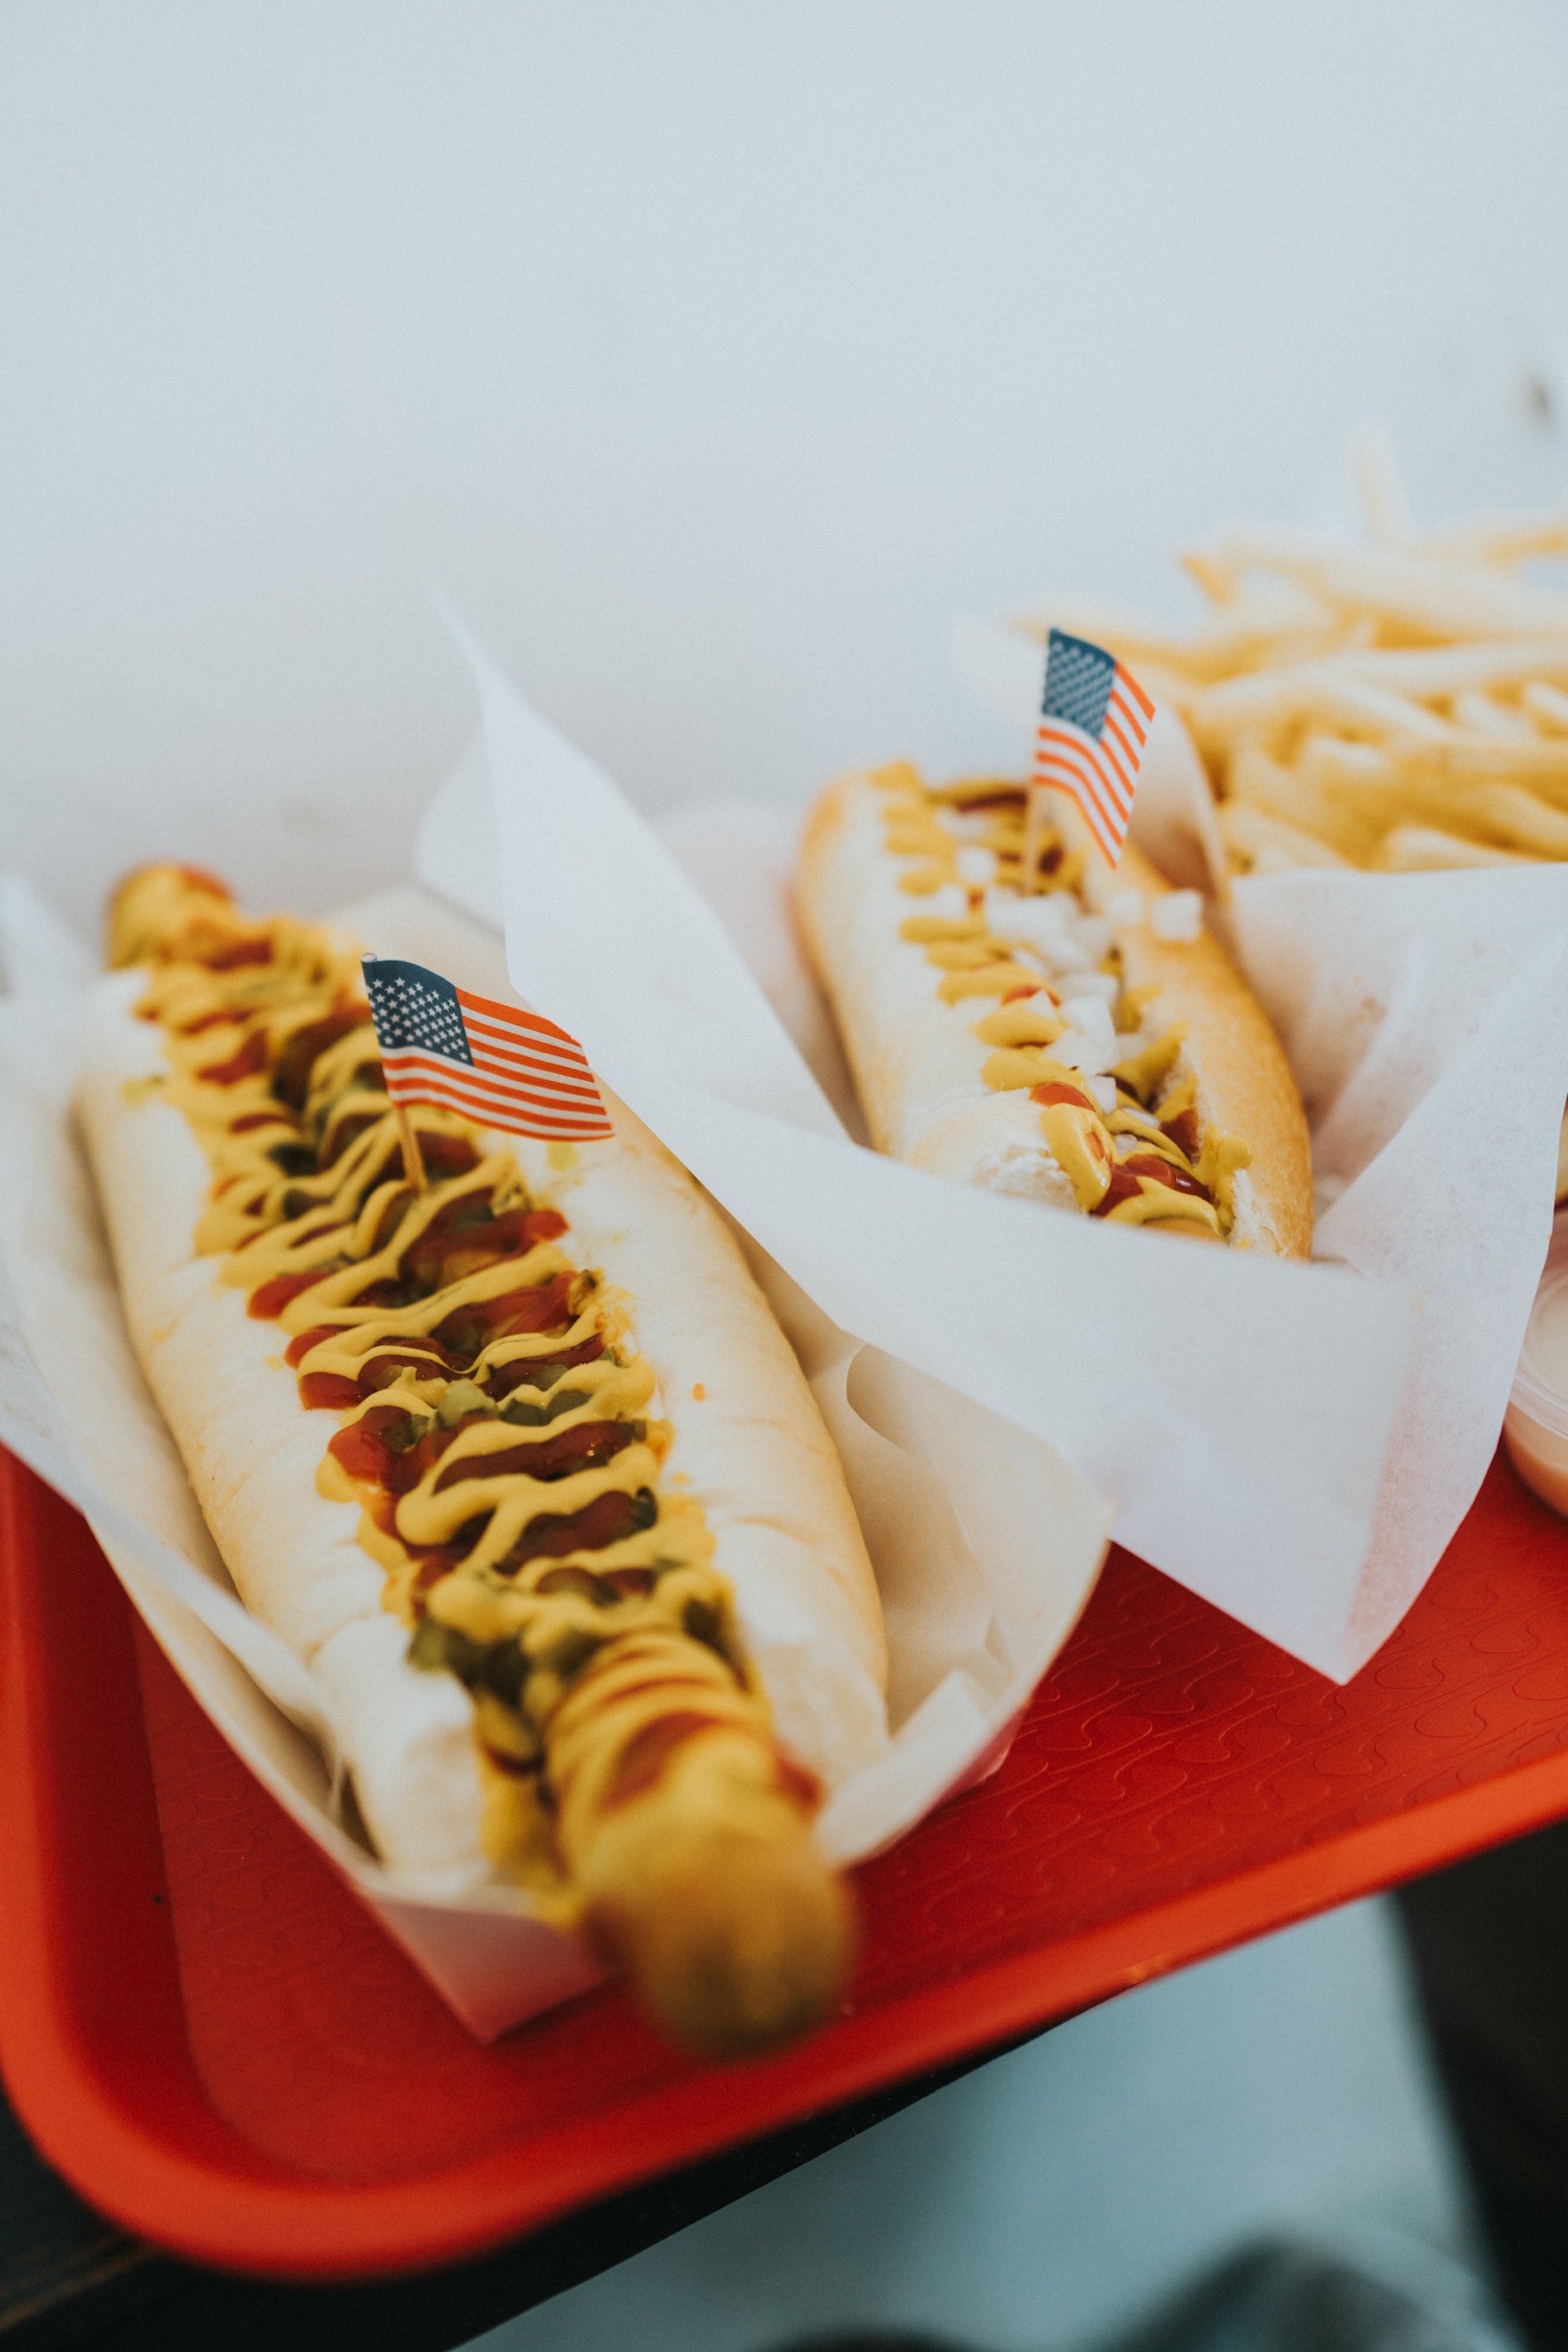 Nashville Shores Hot Dog Eating Contest on 4th of July 2018